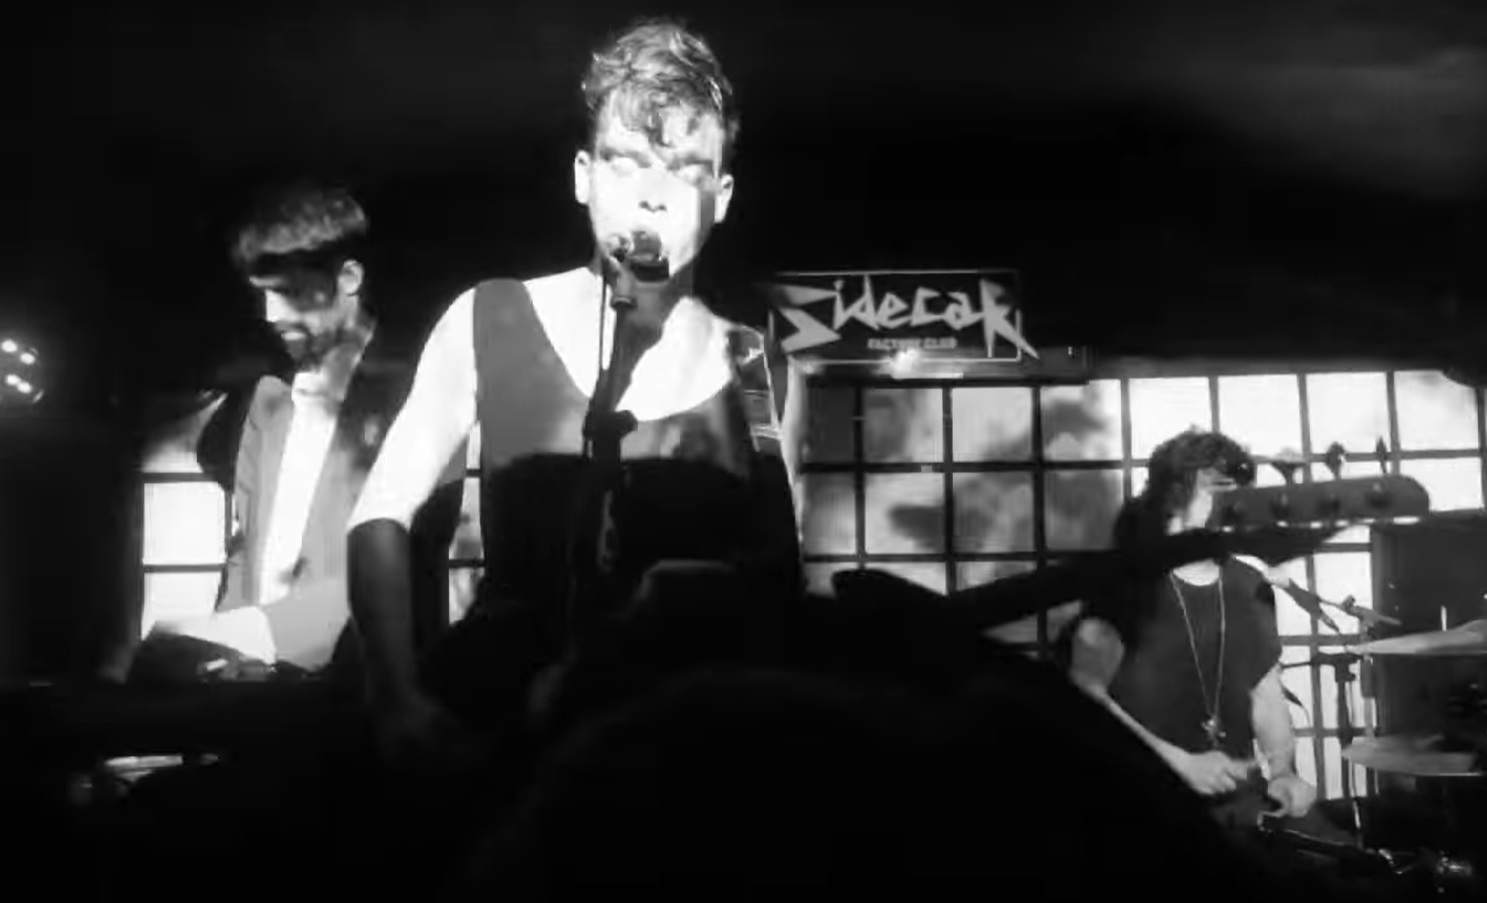 Screenshot from a live performance by Stand Up Against Heart Crime in Barcelona's sidecar club, available on Youtube